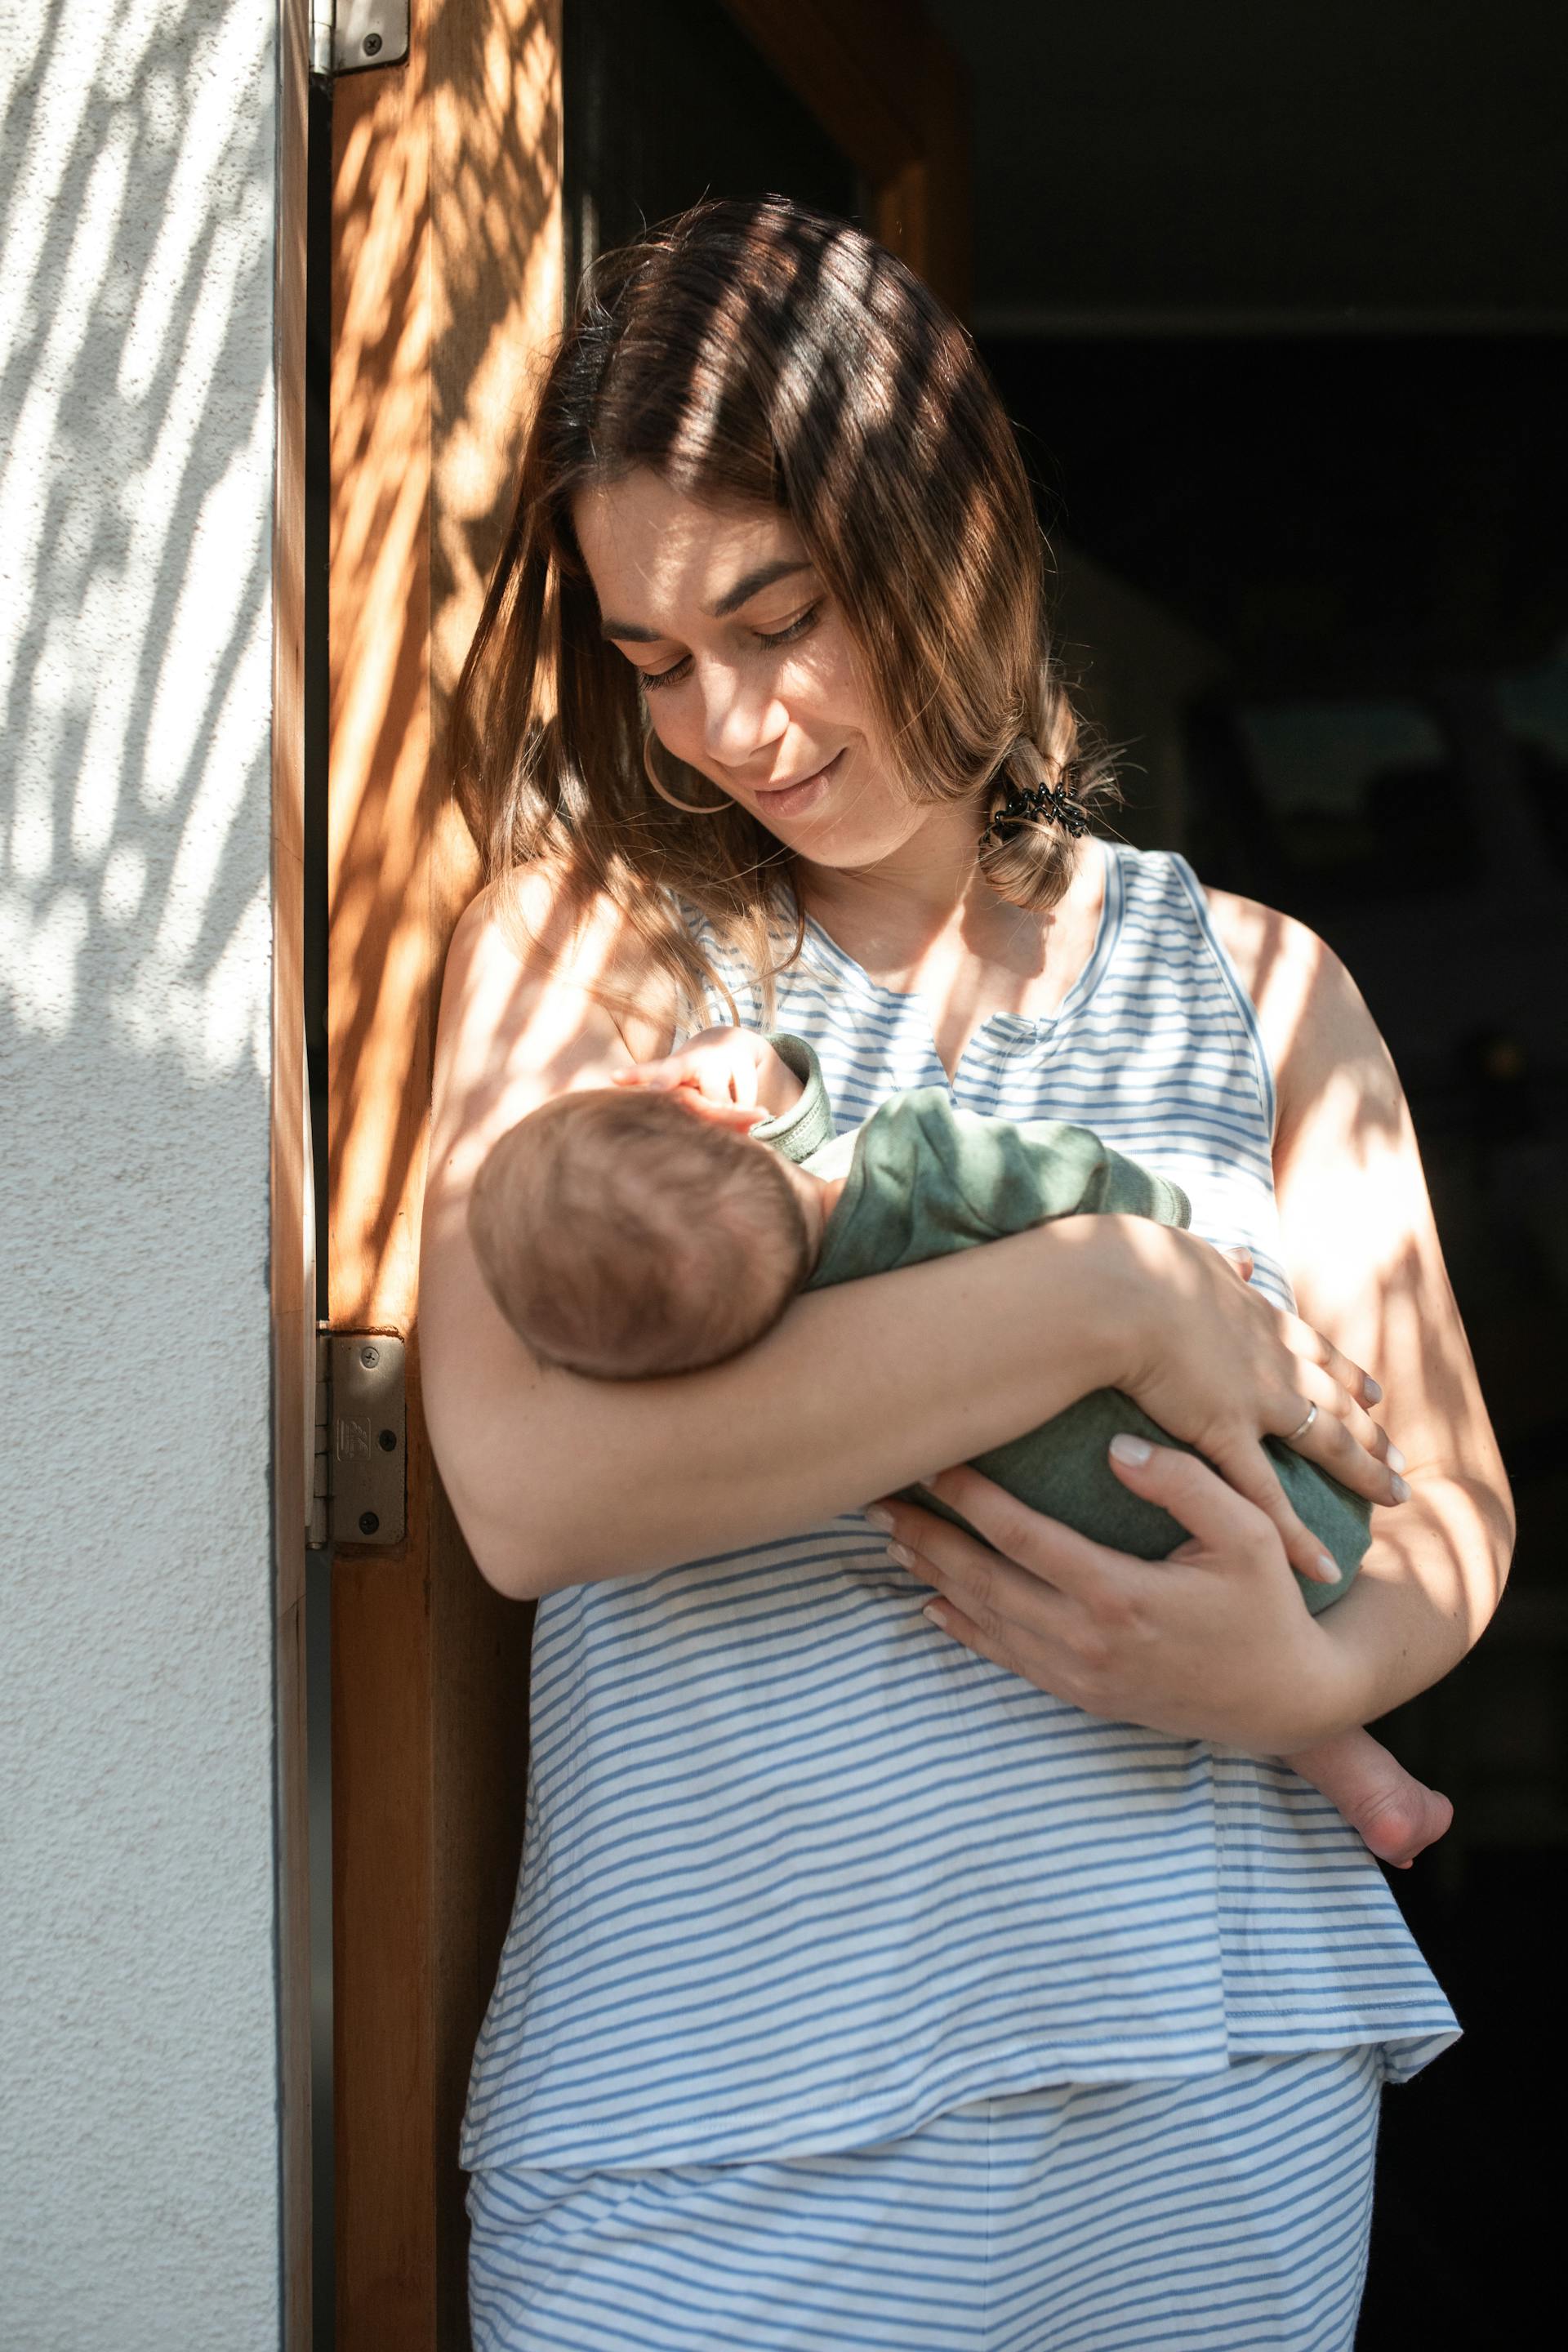 A woman holding her baby | Source: Pexels